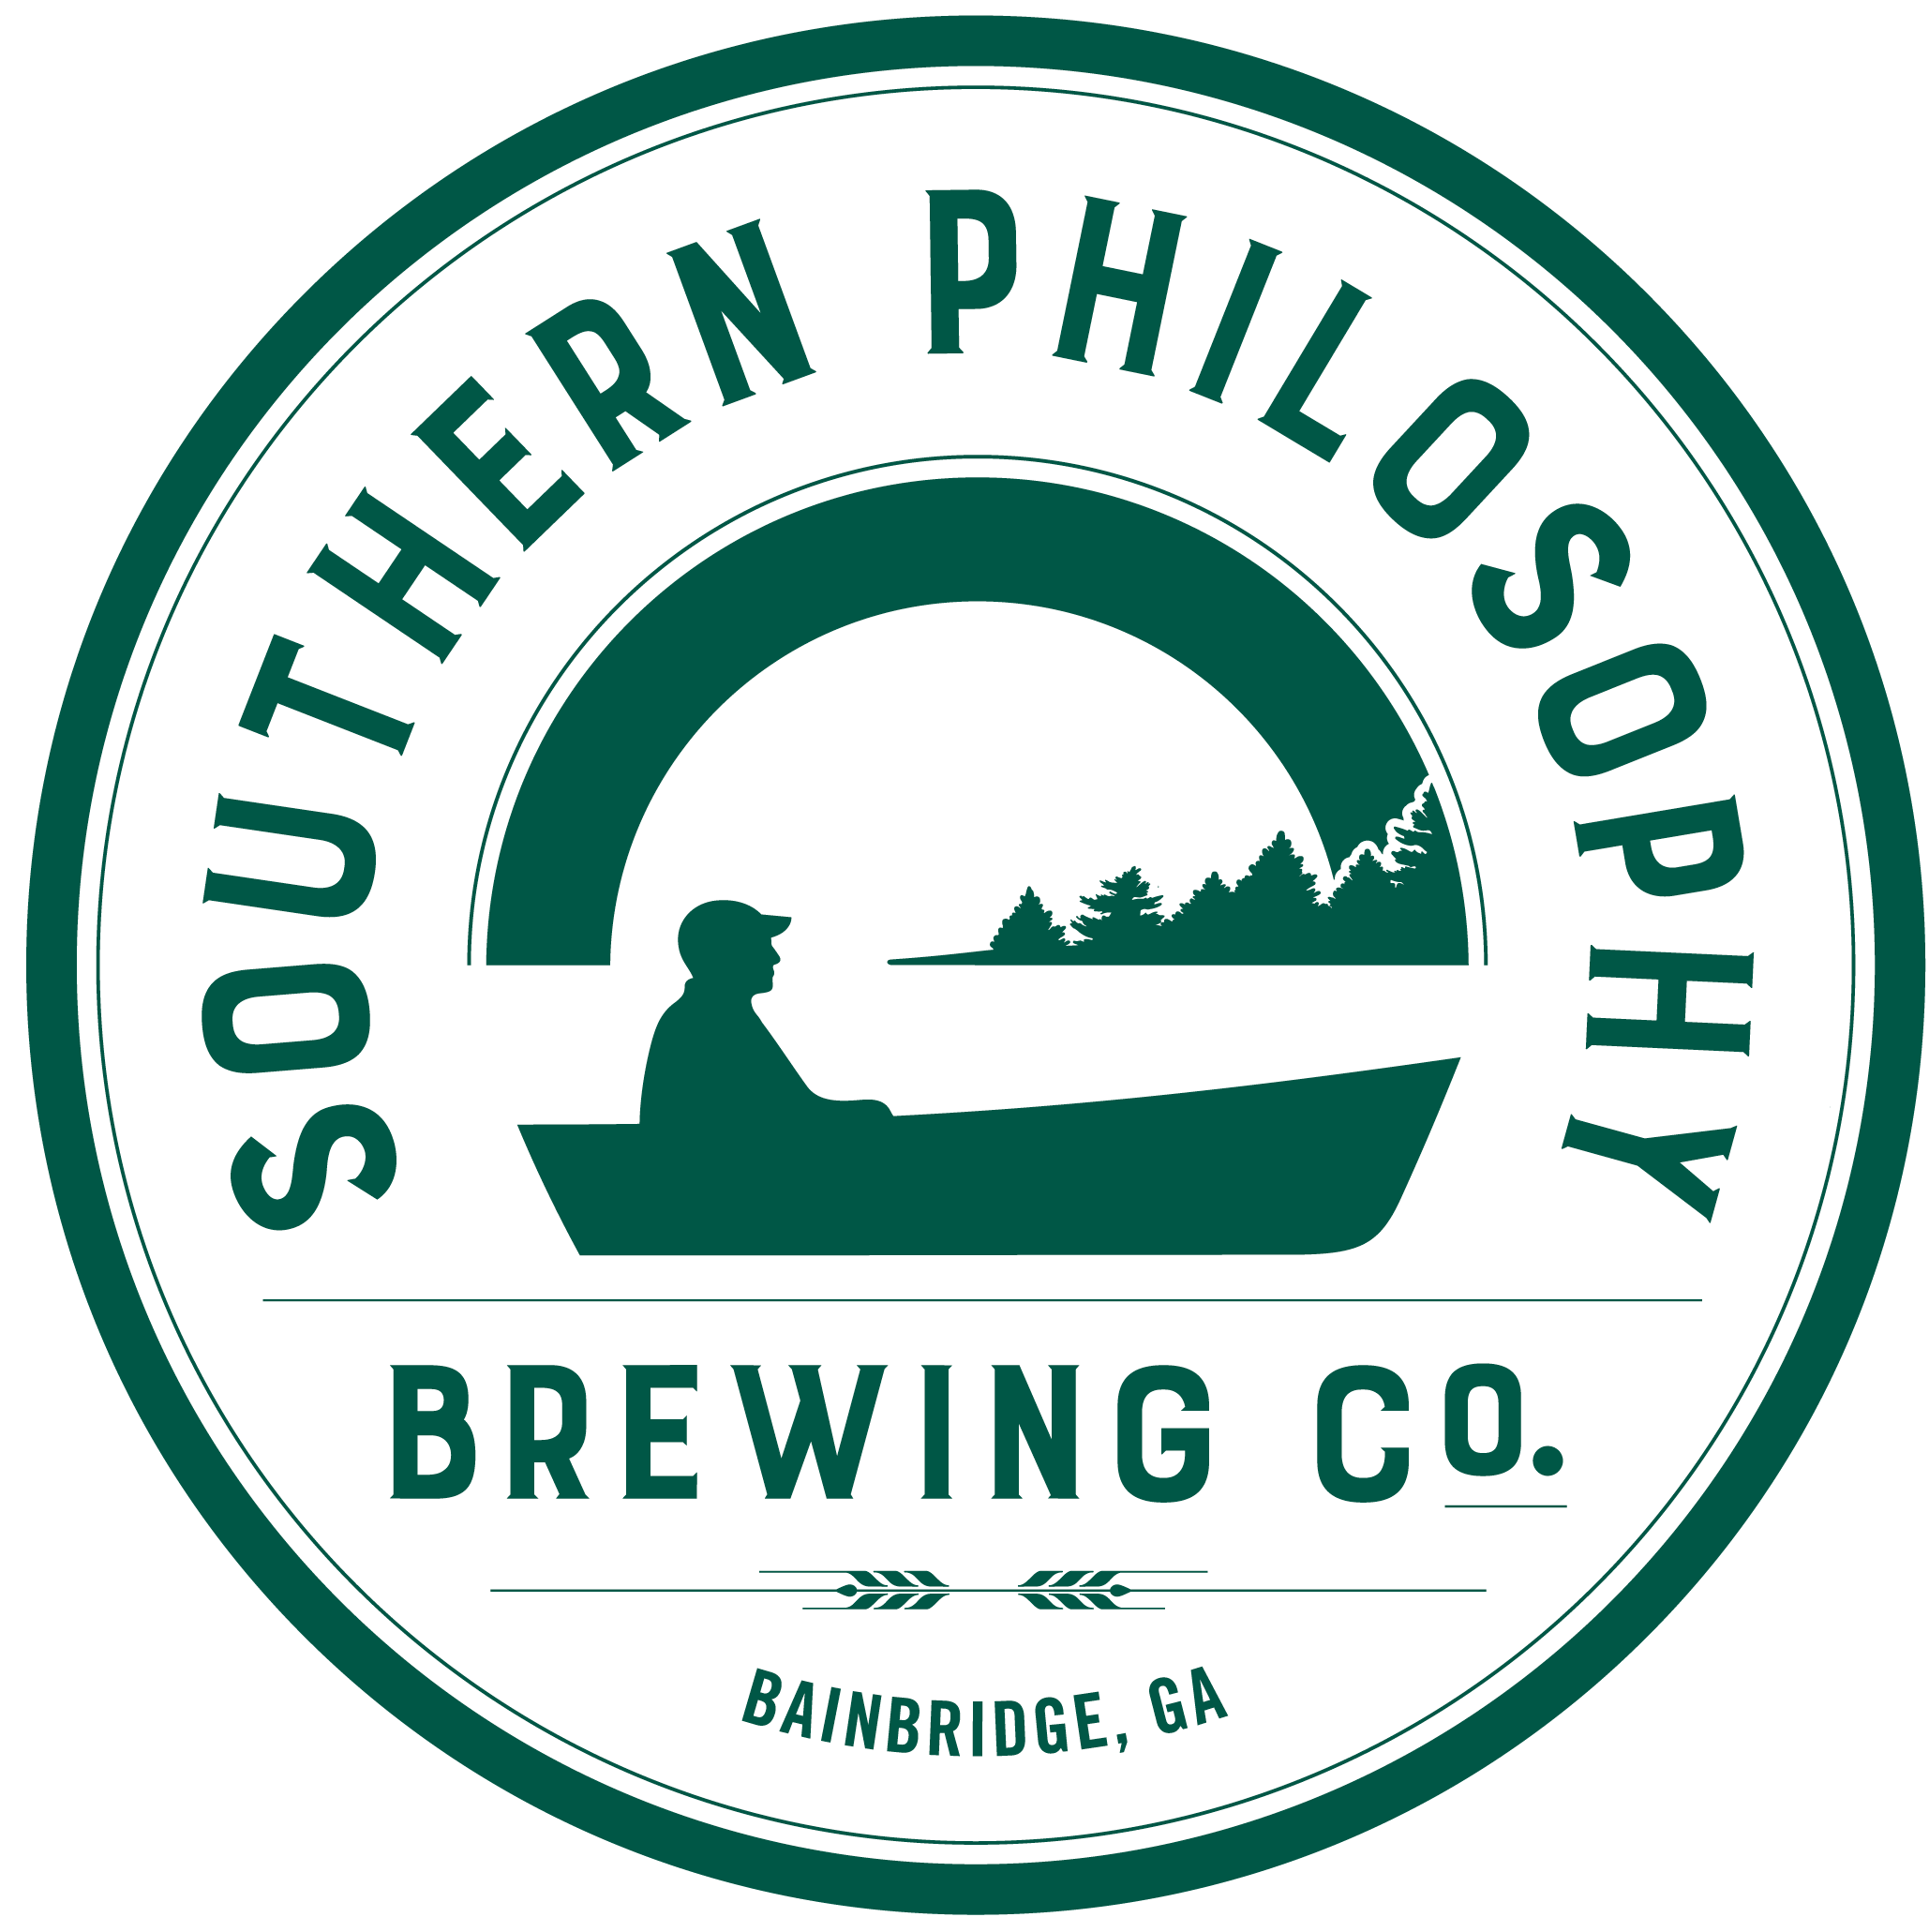 Southern Philosophy Brewing Co.